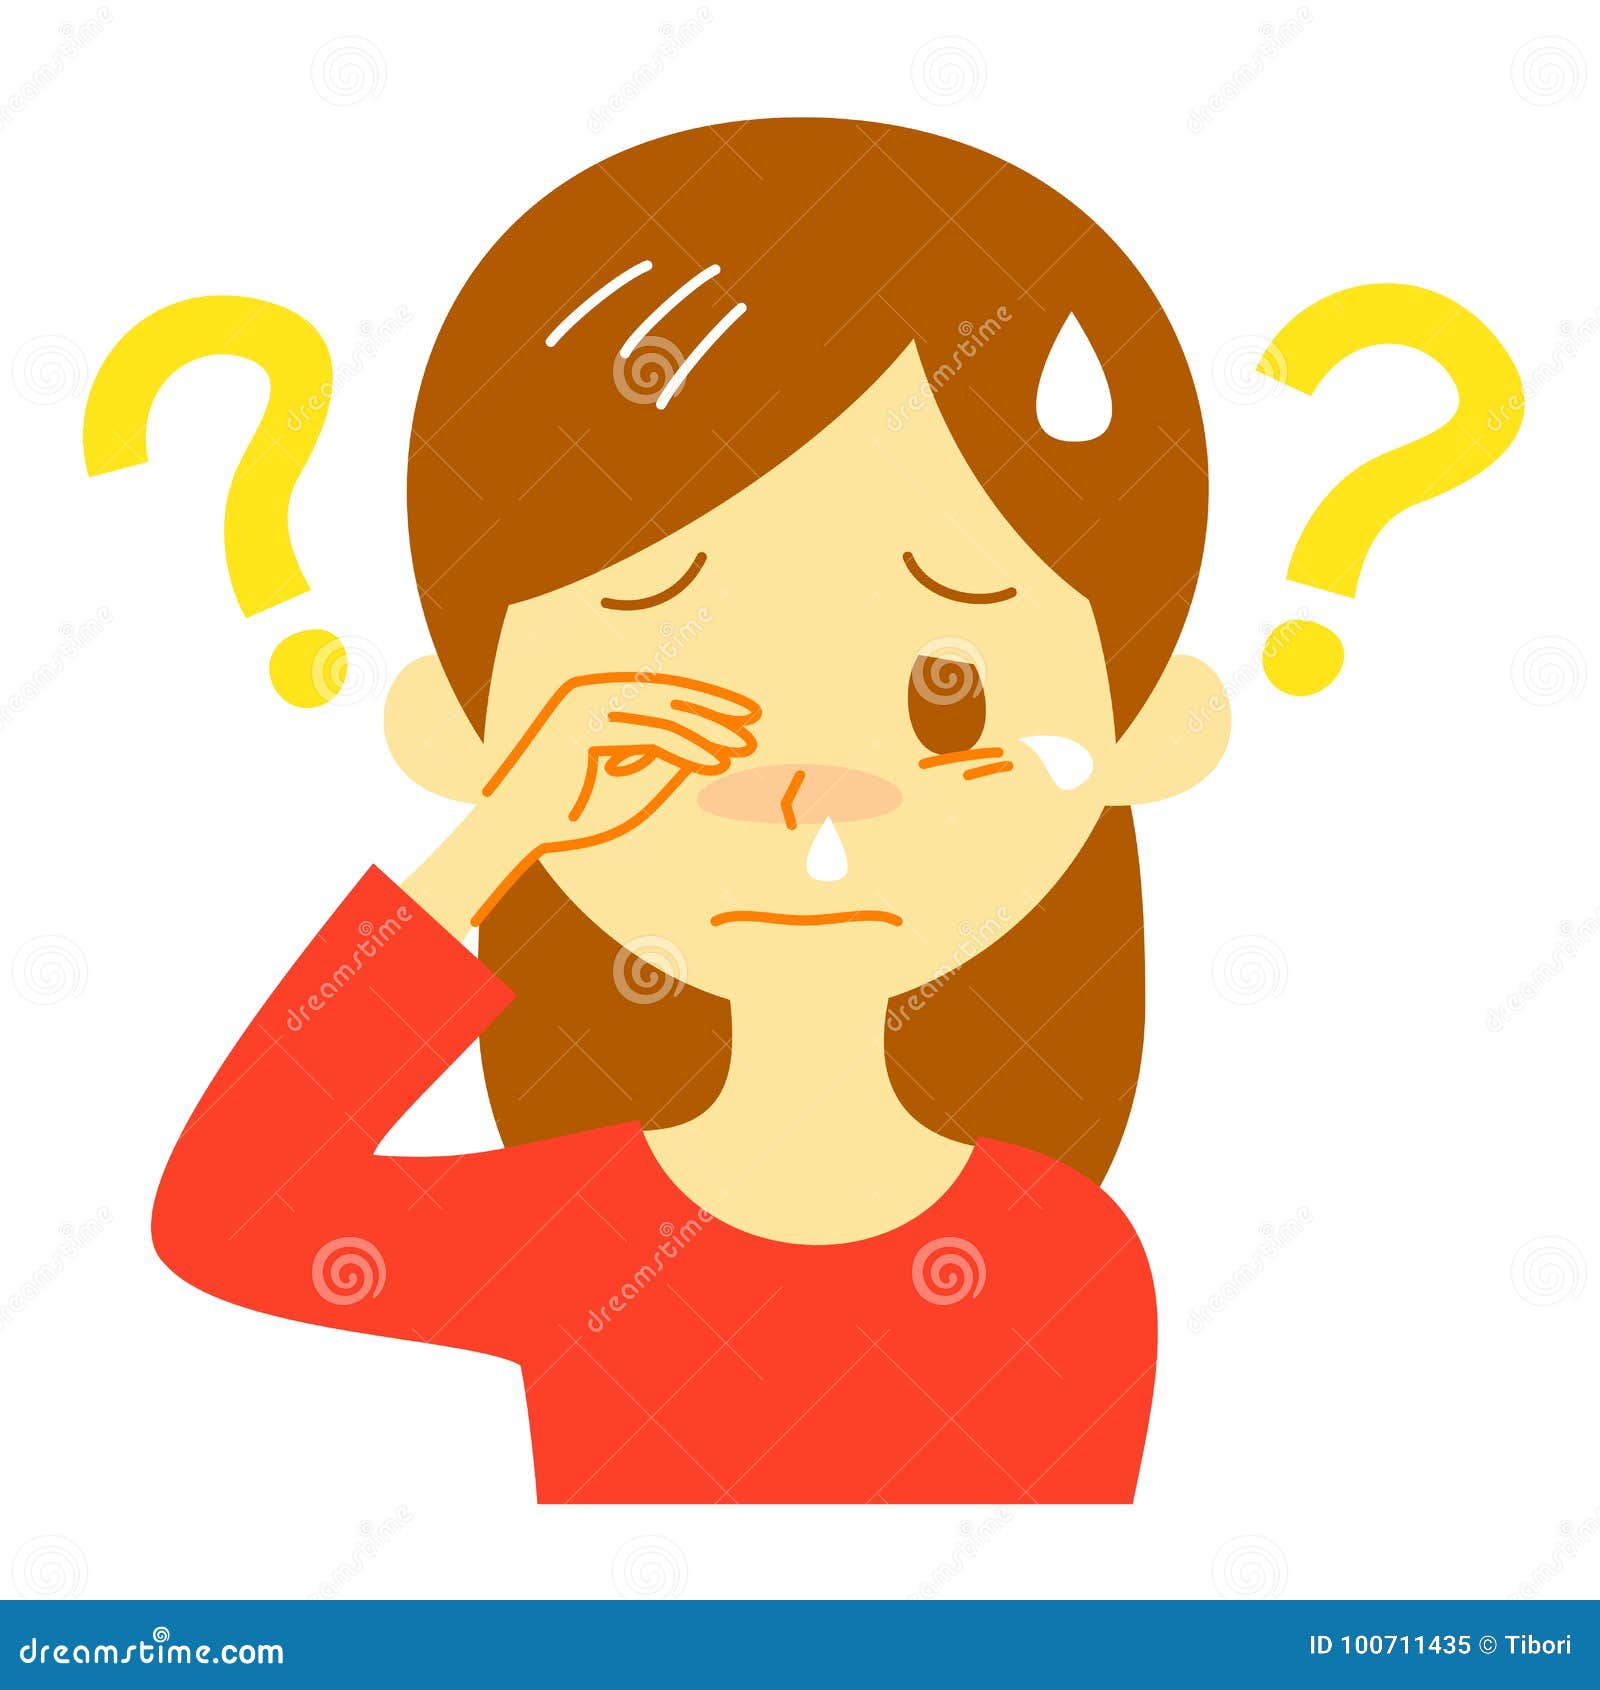 allergy symptom, unknown cause, thinking woman